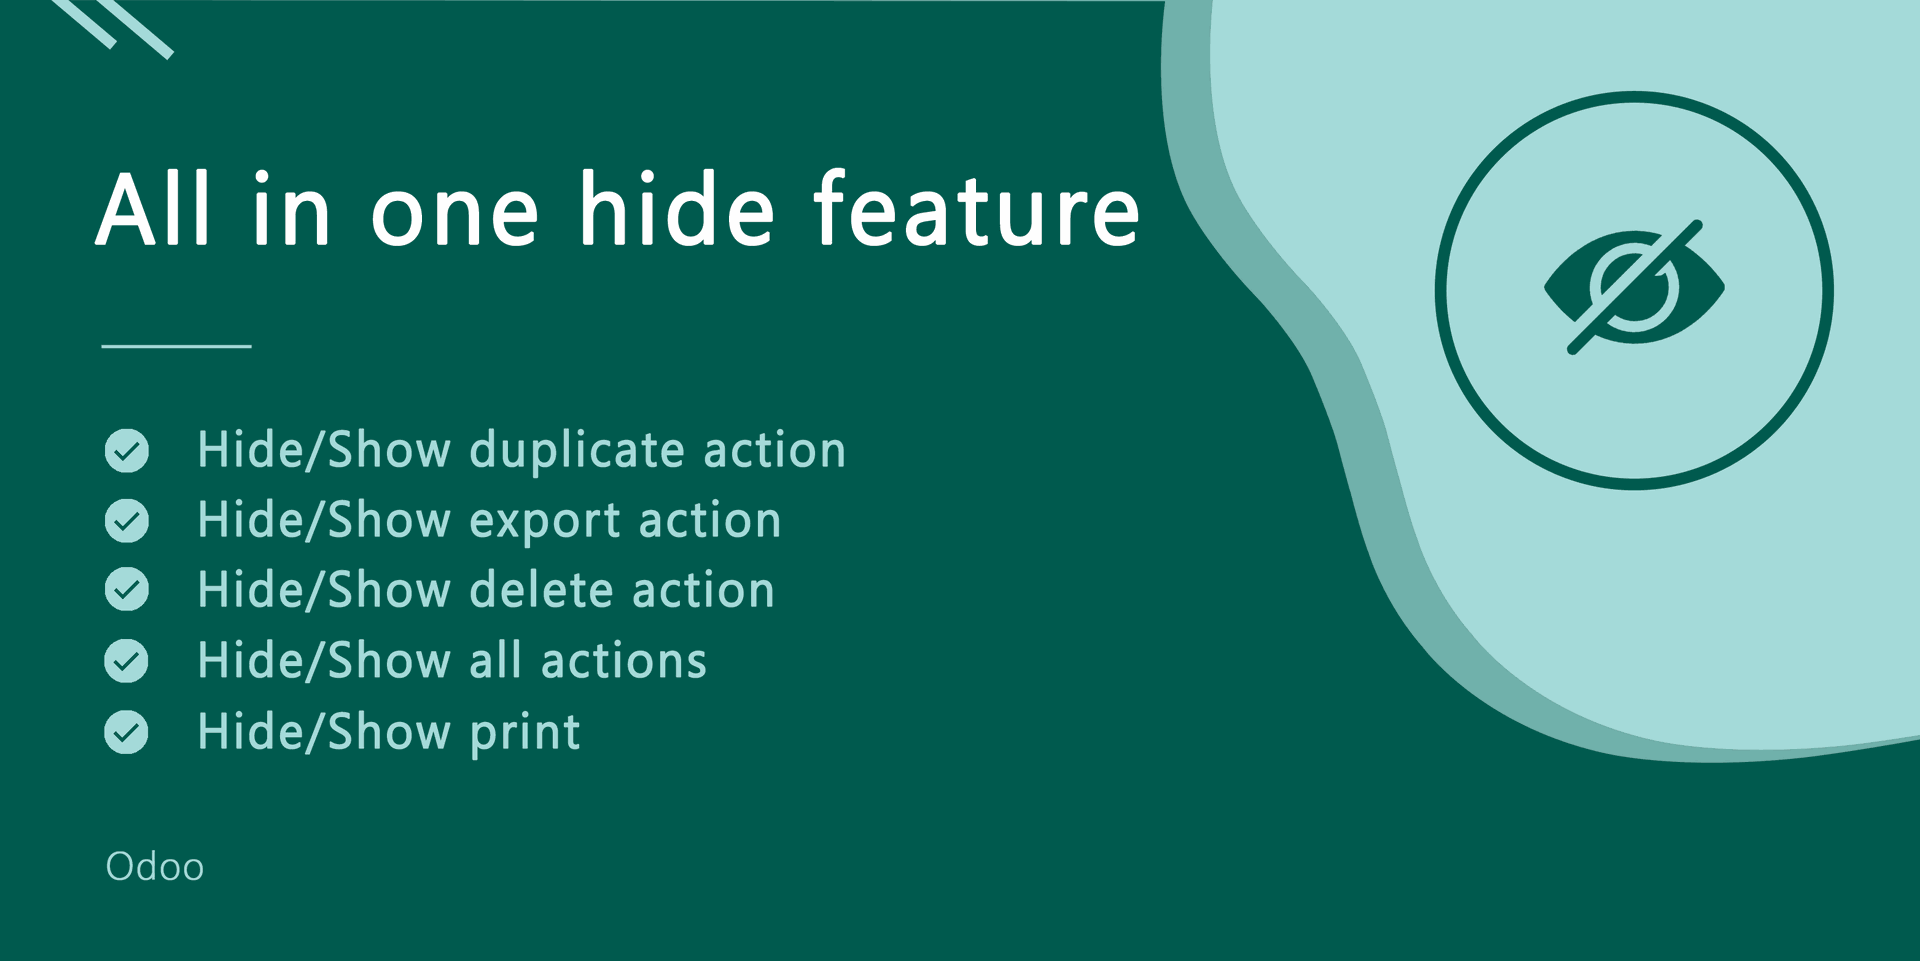 All In One Hide Feature